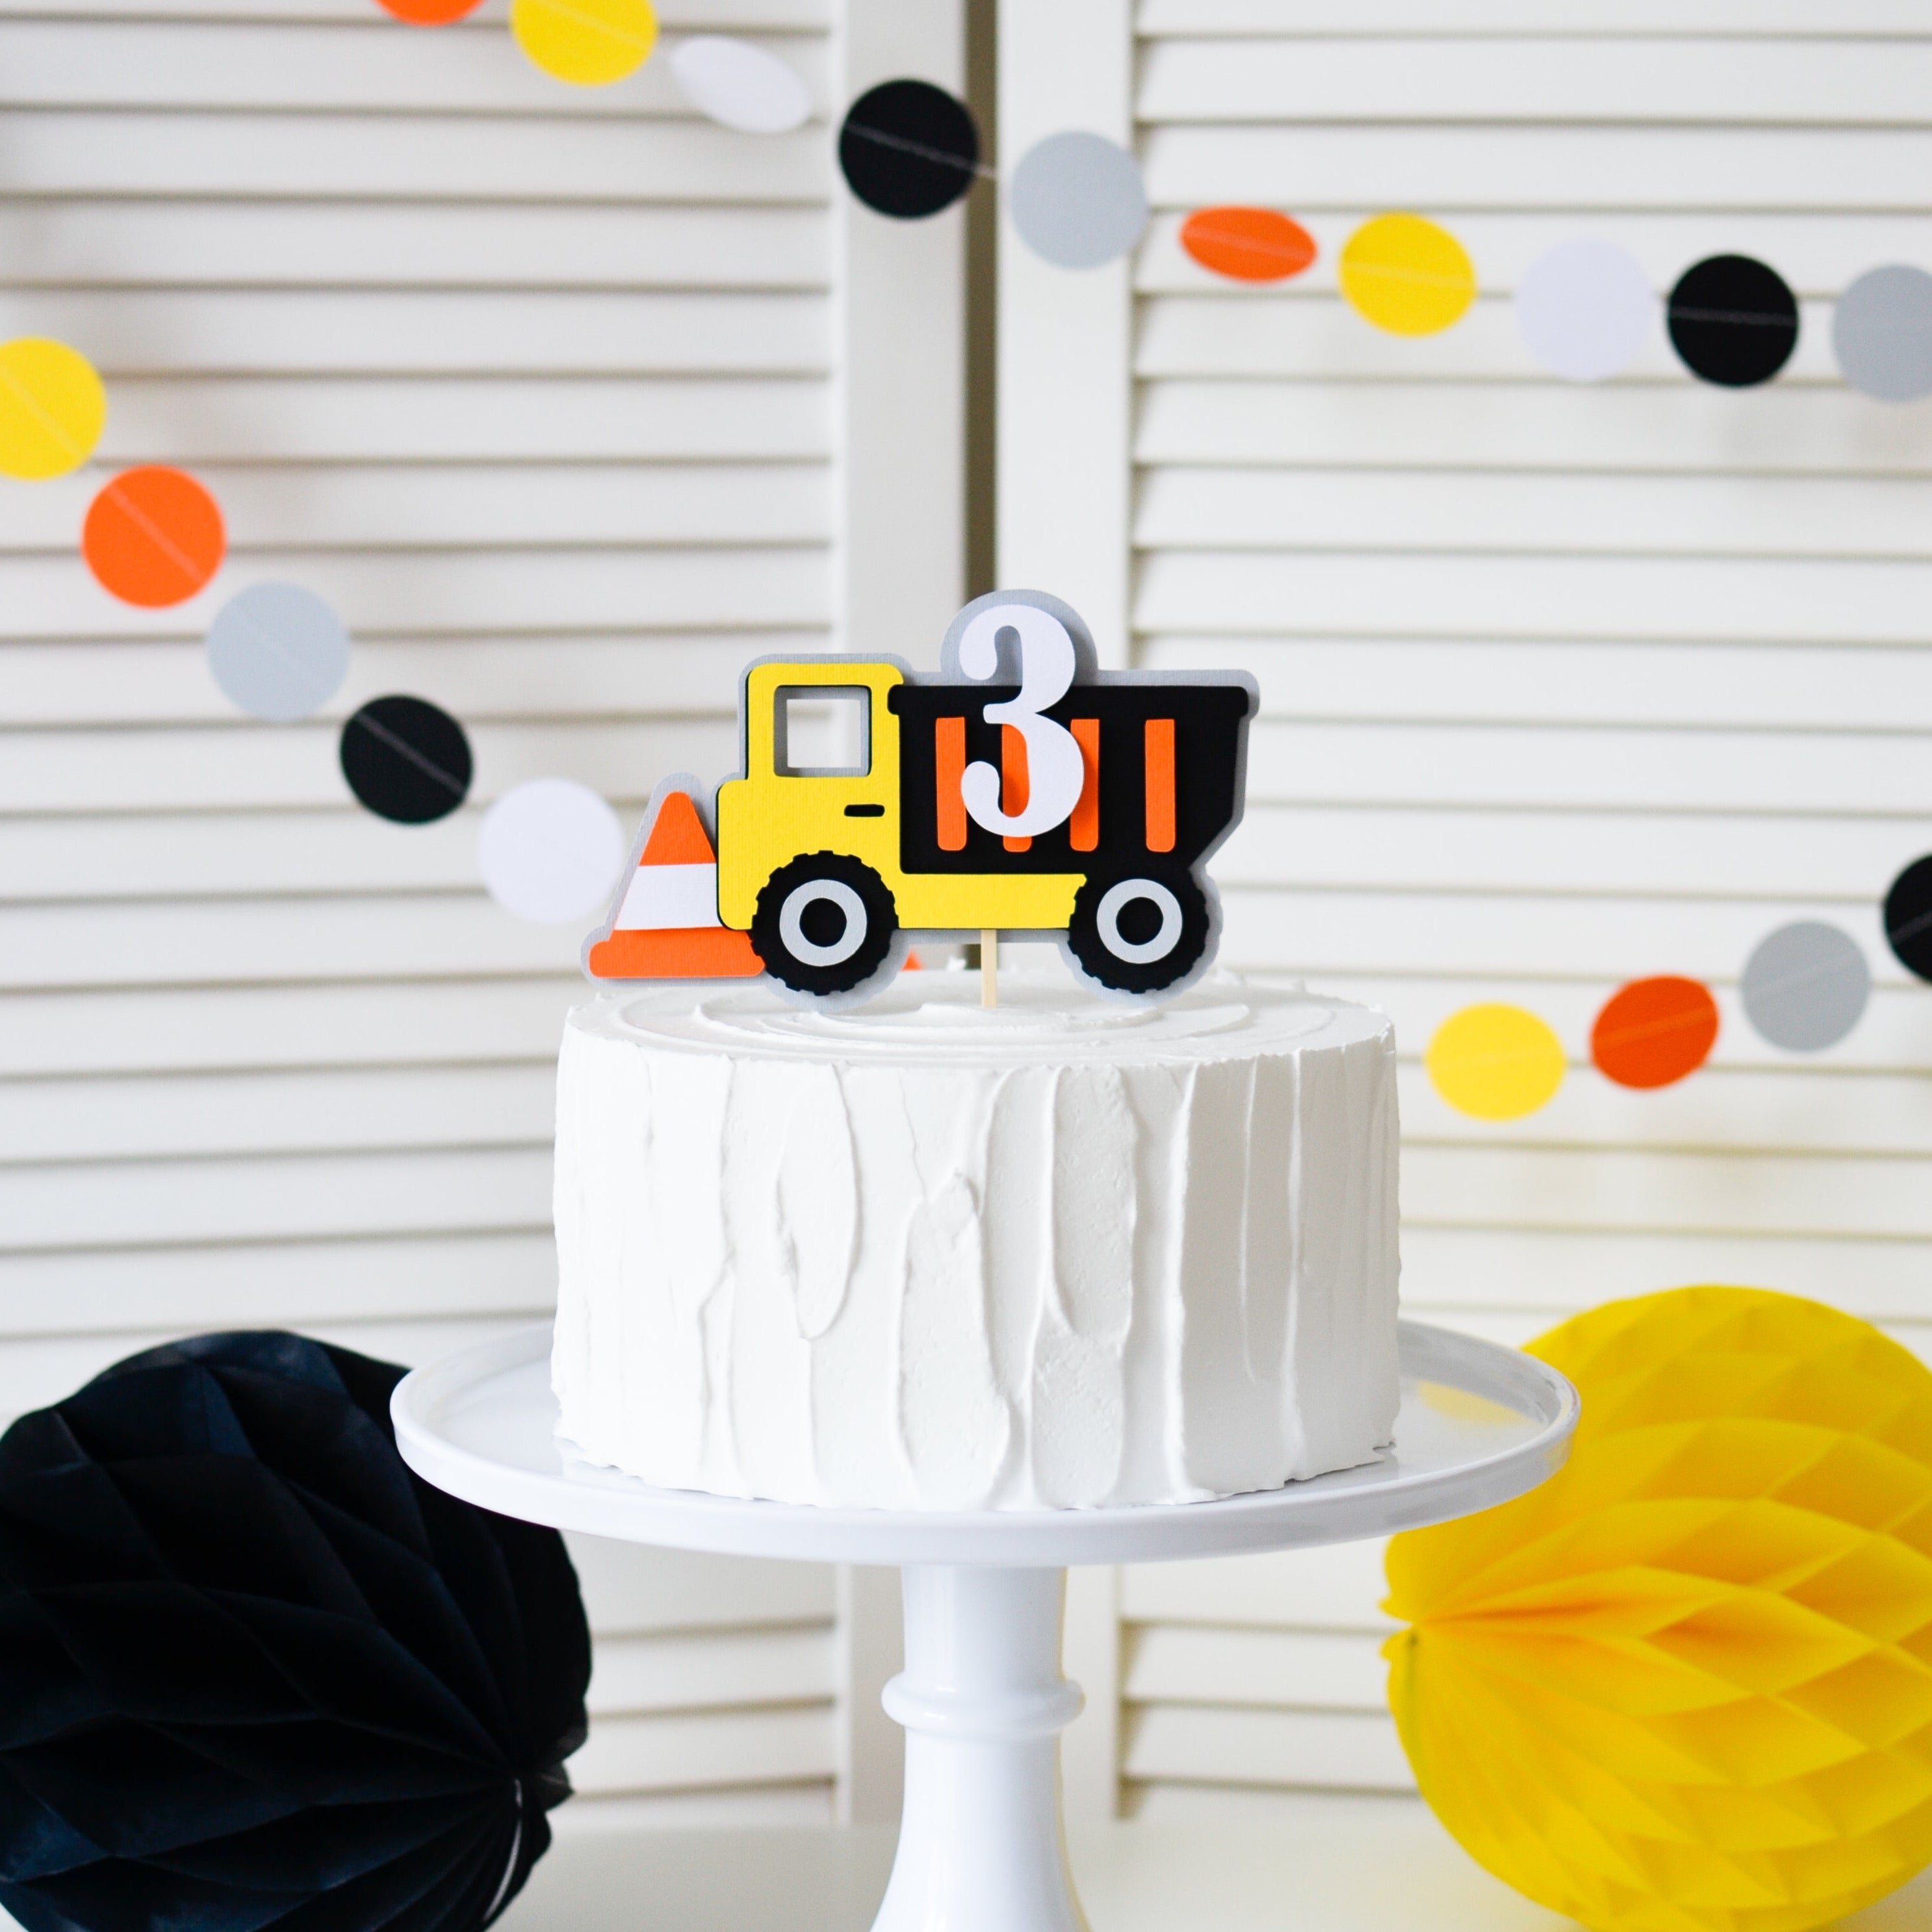 Construction Cake Topper Construction First Birthday Decor Construction Theme 1st Birthday Party Construction Cake Topper Boy Cake Smash Let's Par-tee Under Construction Digger Excavator Party Truck Bulldozer Party 